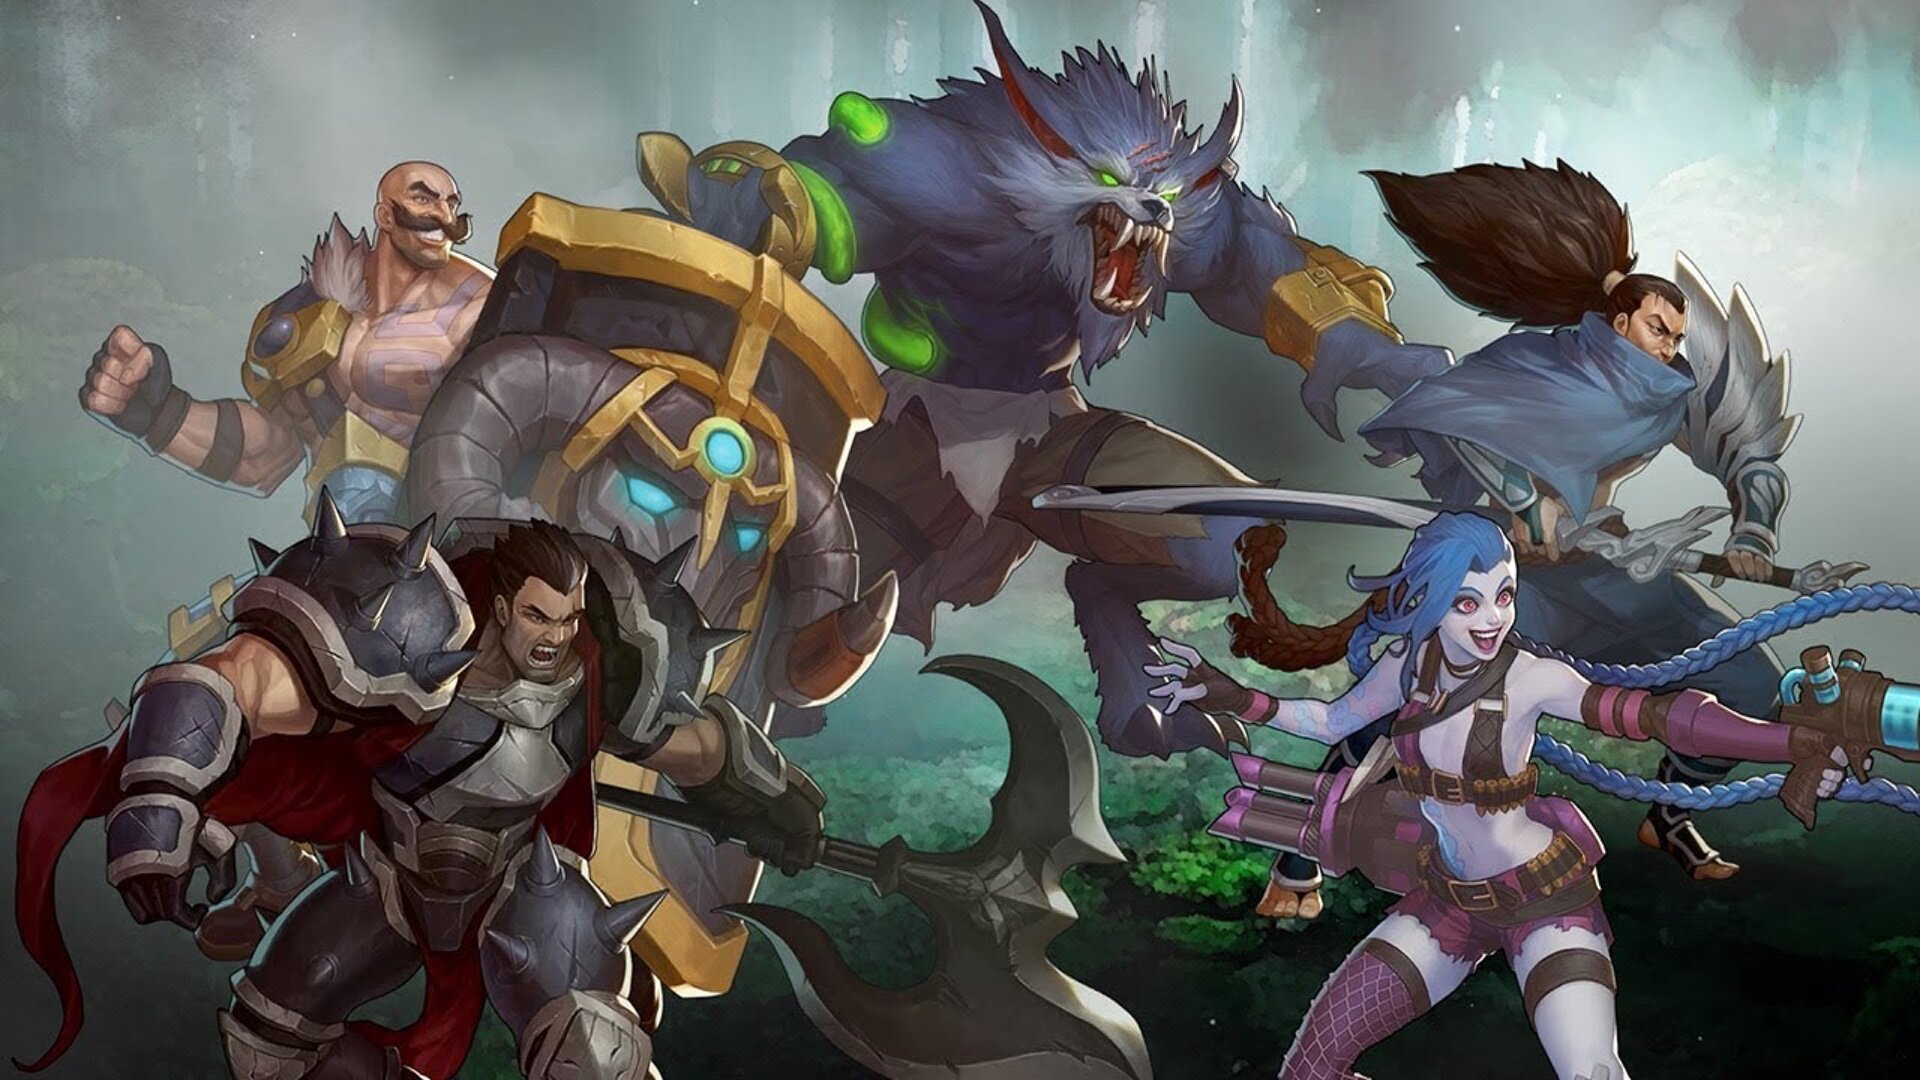 There's a LEAGUE OF LEGENDS Animated Series in Development at Riot Games Called ARCANE